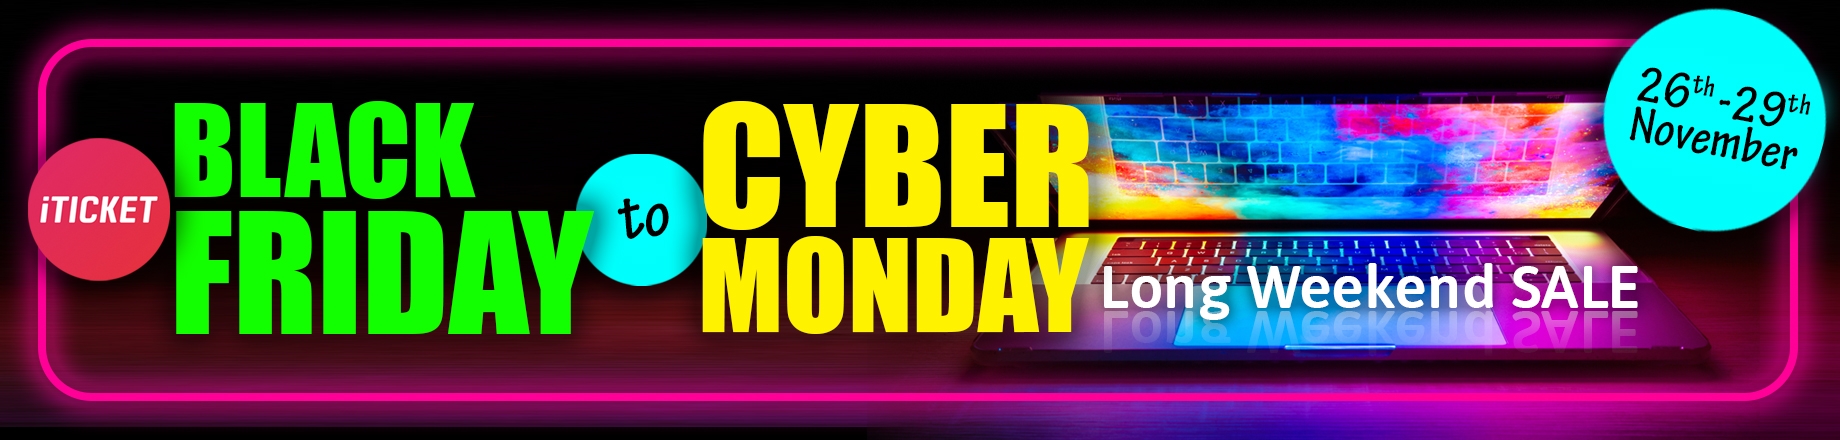 Black Friday to Cyber Monday Long Weekend SALE